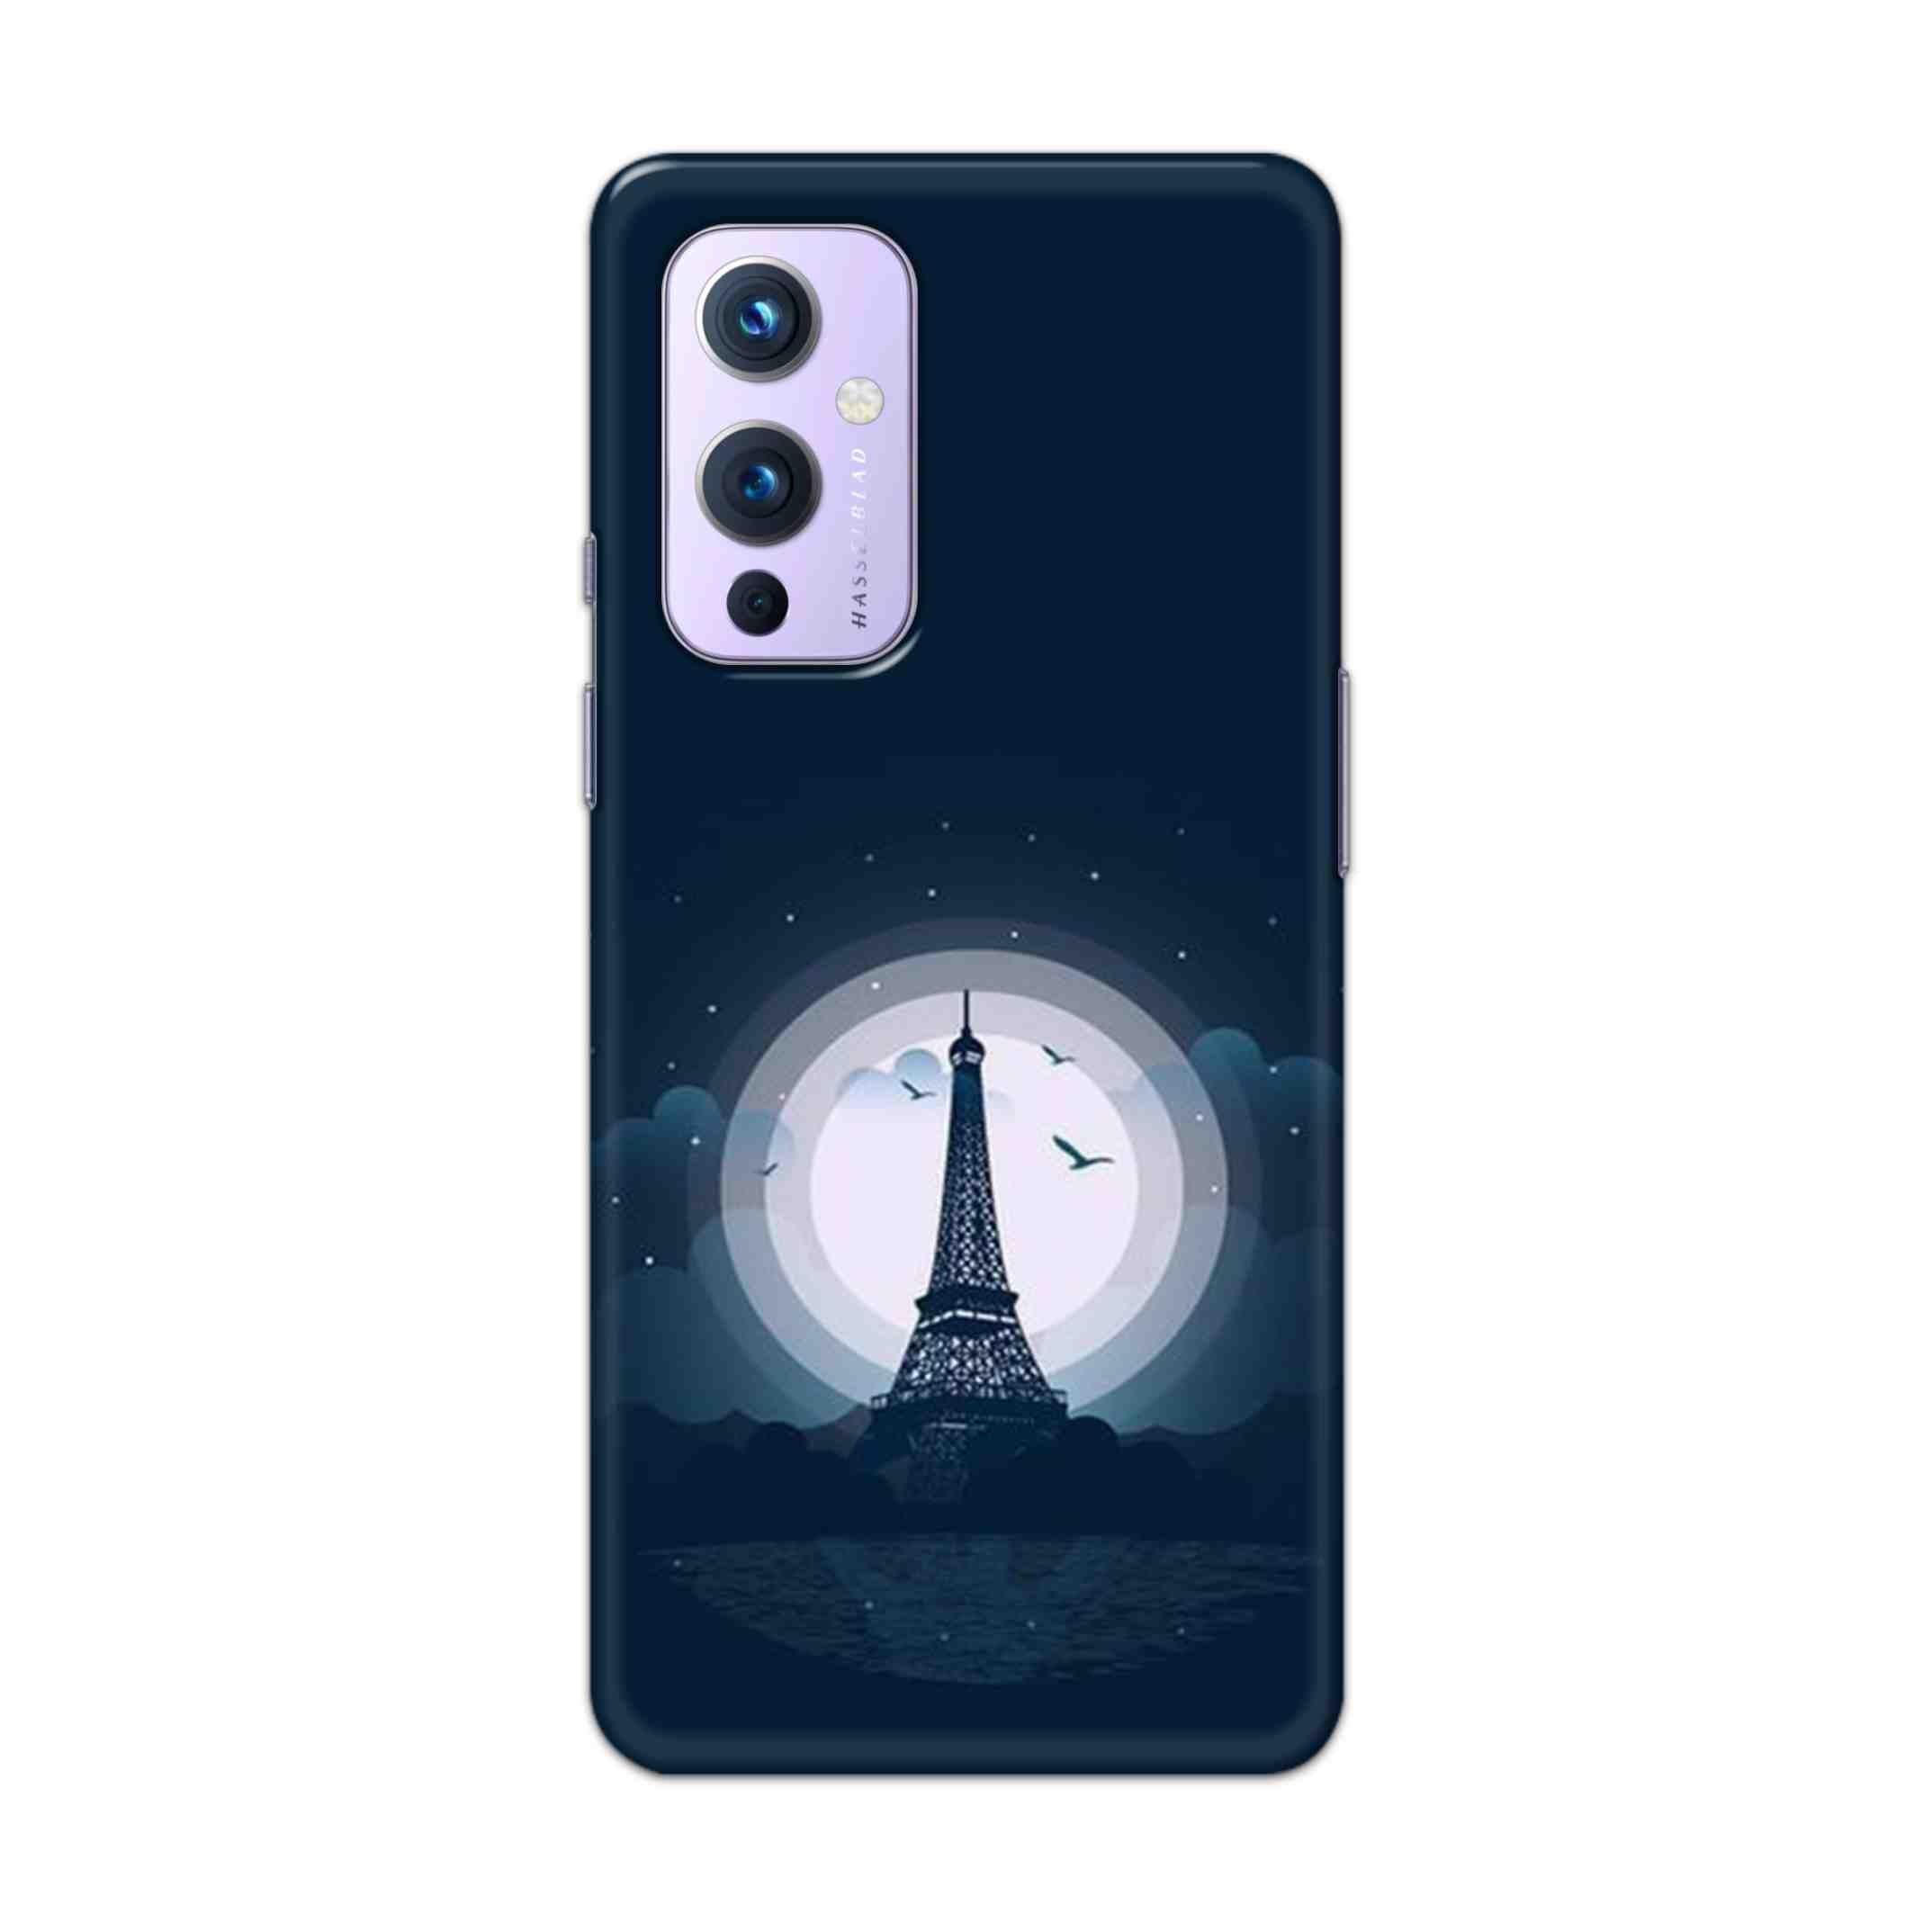 Buy Paris Eiffel Tower Hard Back Mobile Phone Case Cover For OnePlus 9 Online